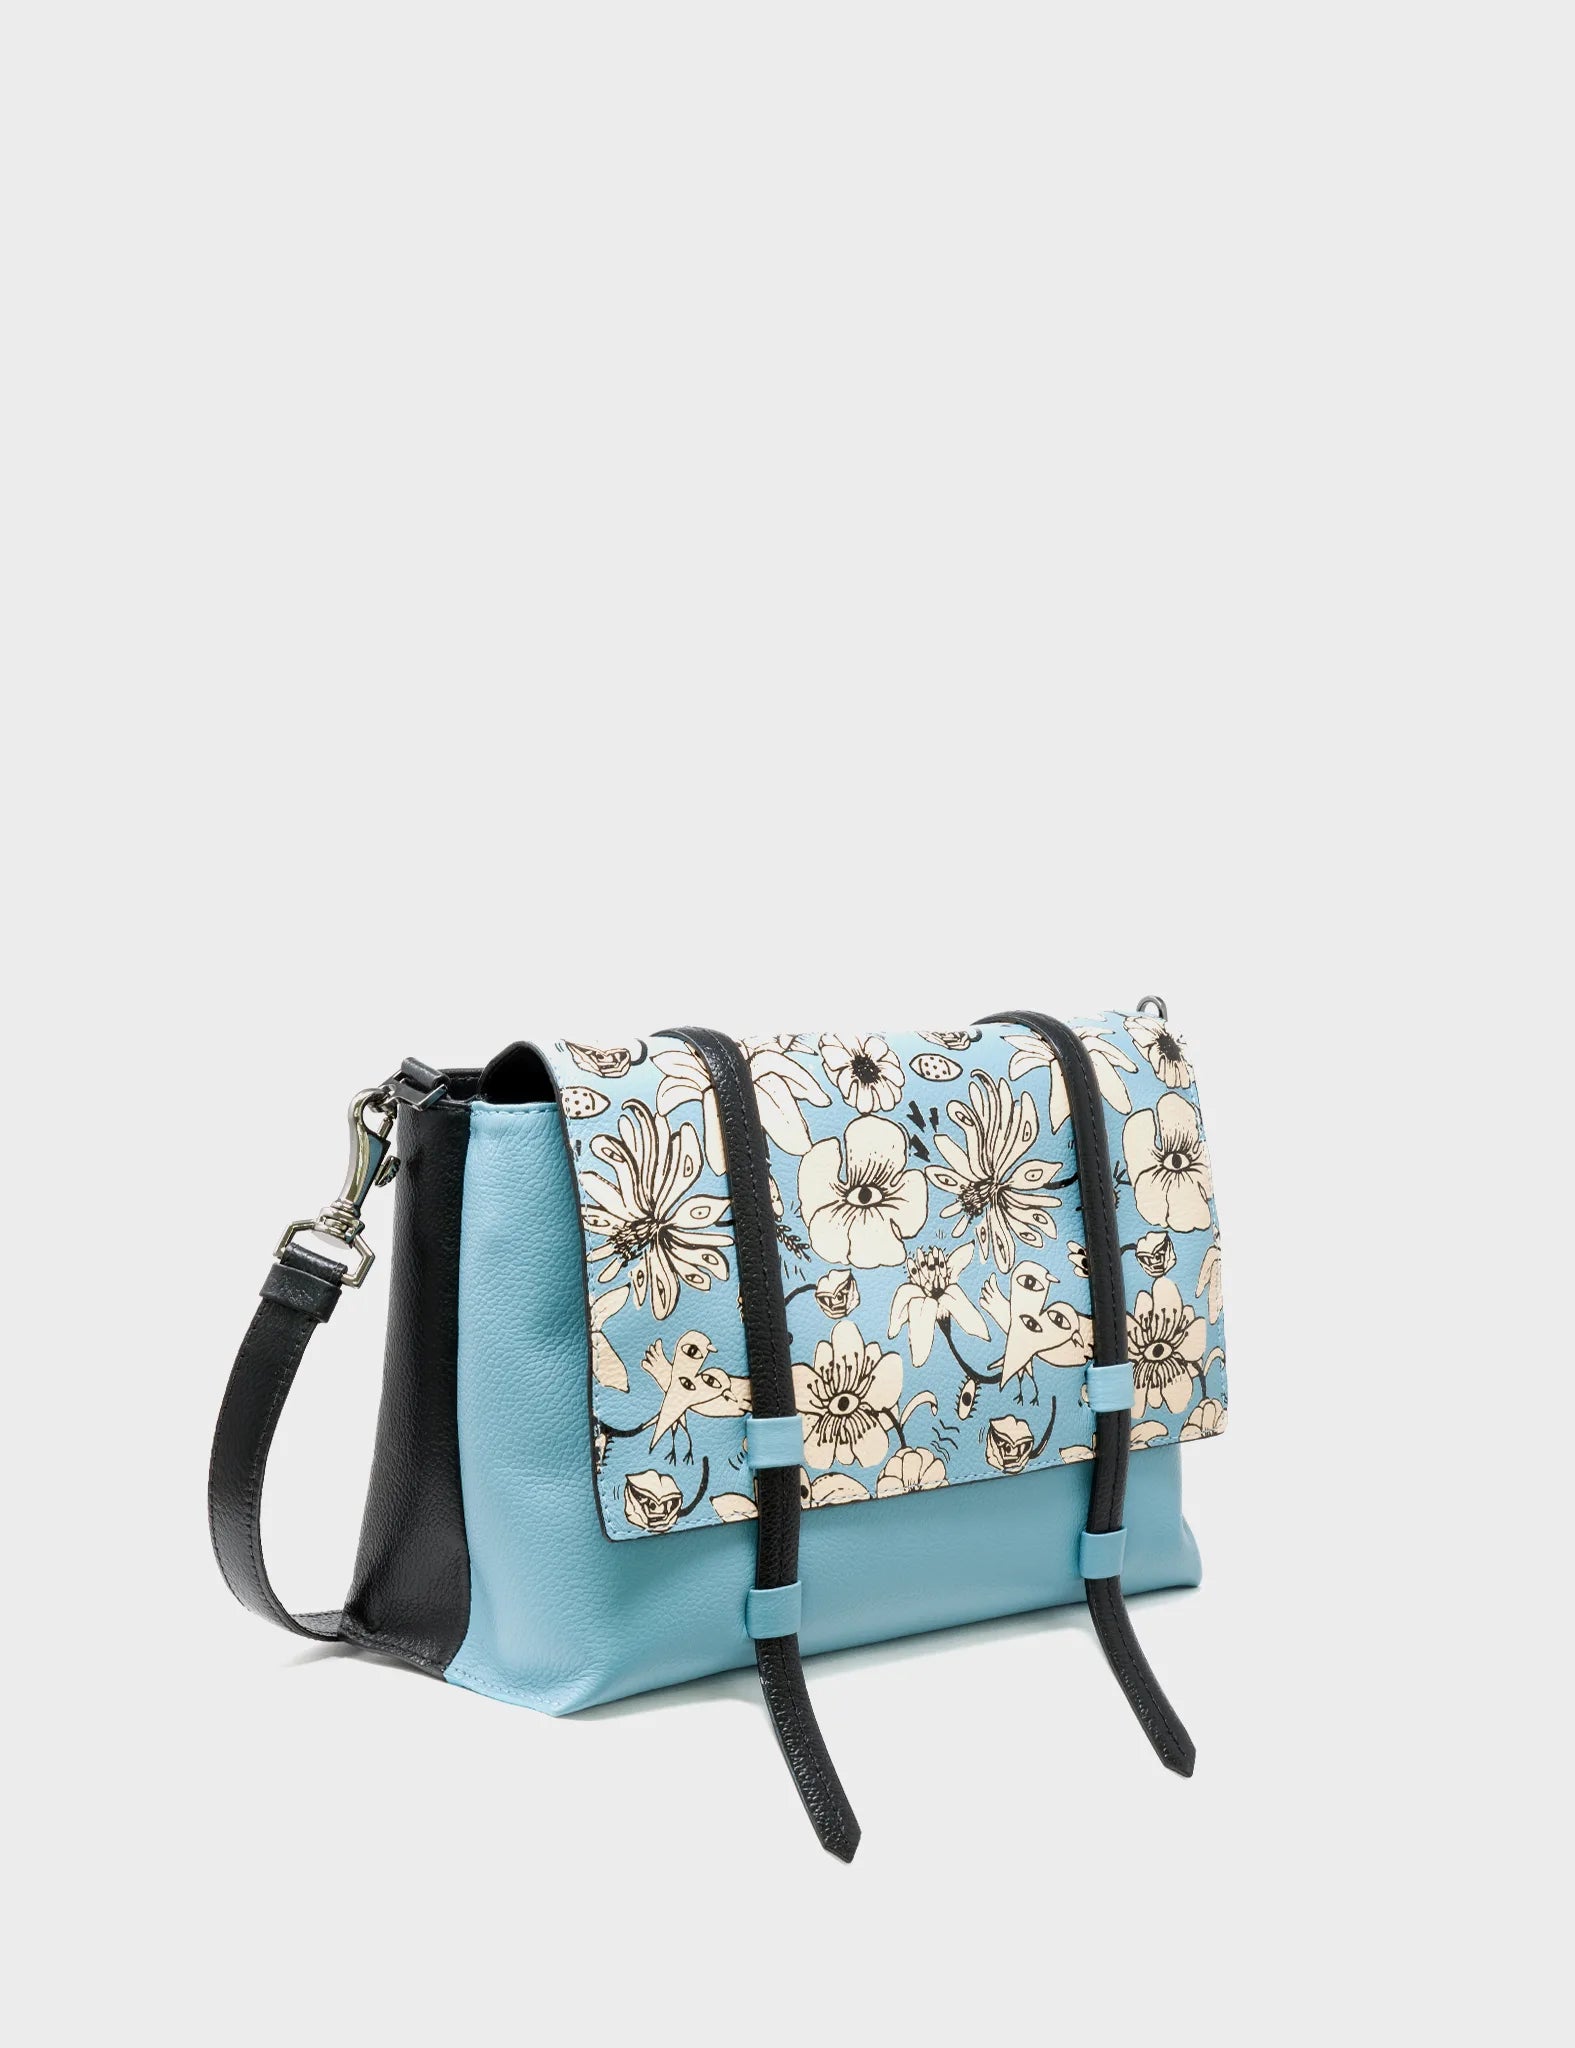 Reversible Small Messenger Bag Balck And Blue Leather - Floral Print